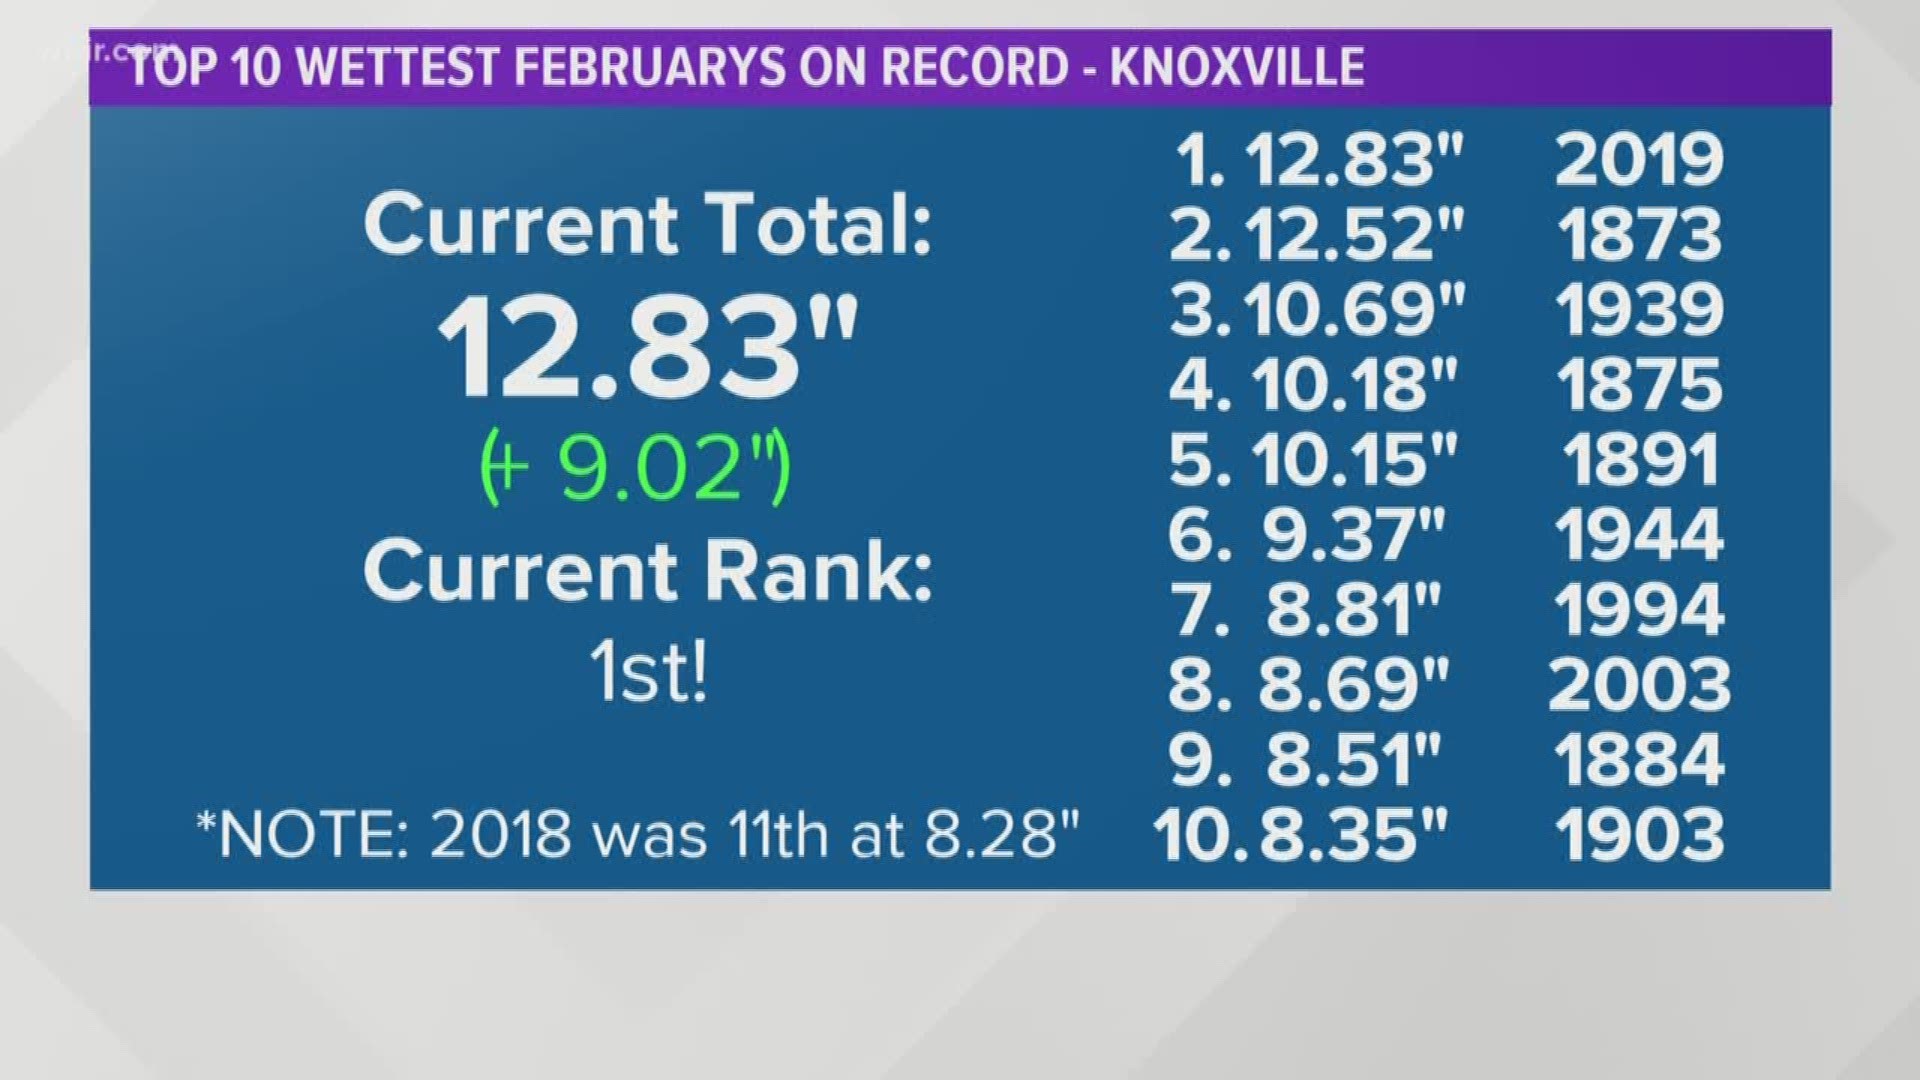 2019 is the wettest February on record in Knoxville, where we saw 12'83" of rain fell at the airport. Saturday was the wettest day in Knoxville in 7 years.